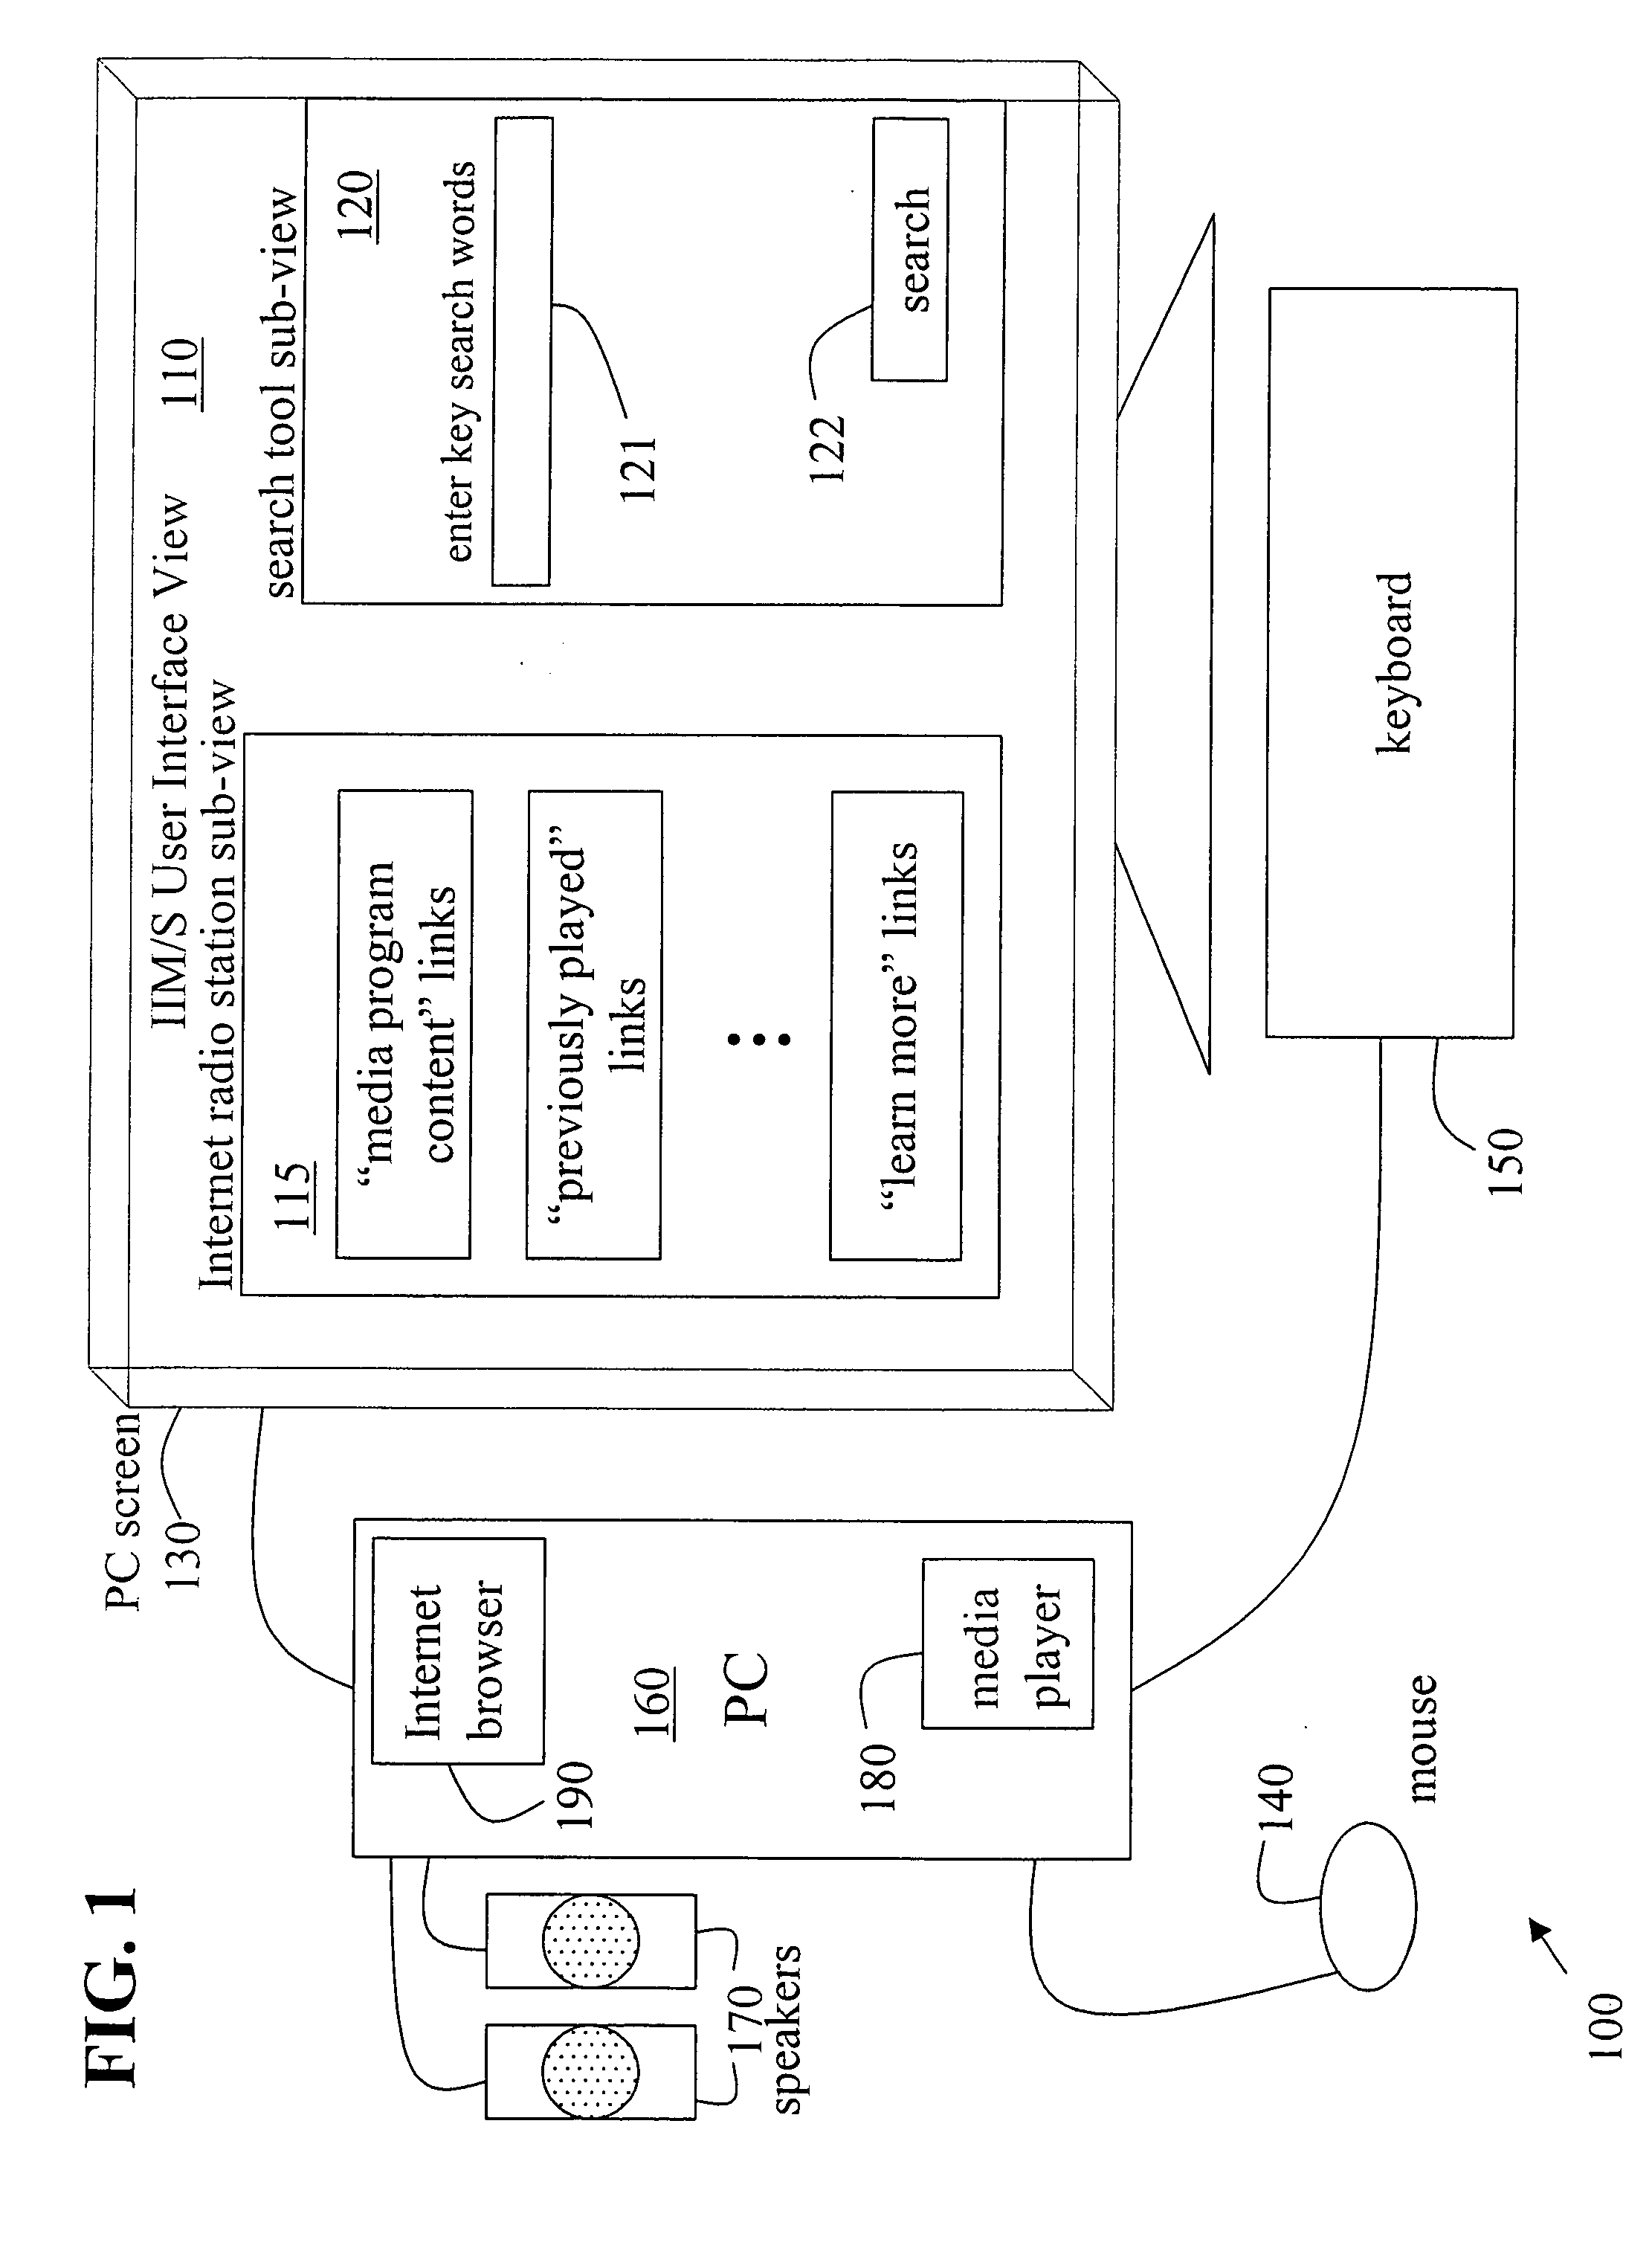 Methods to adapt search results provided by an integrated network-based media/search engine based on user lifestyle